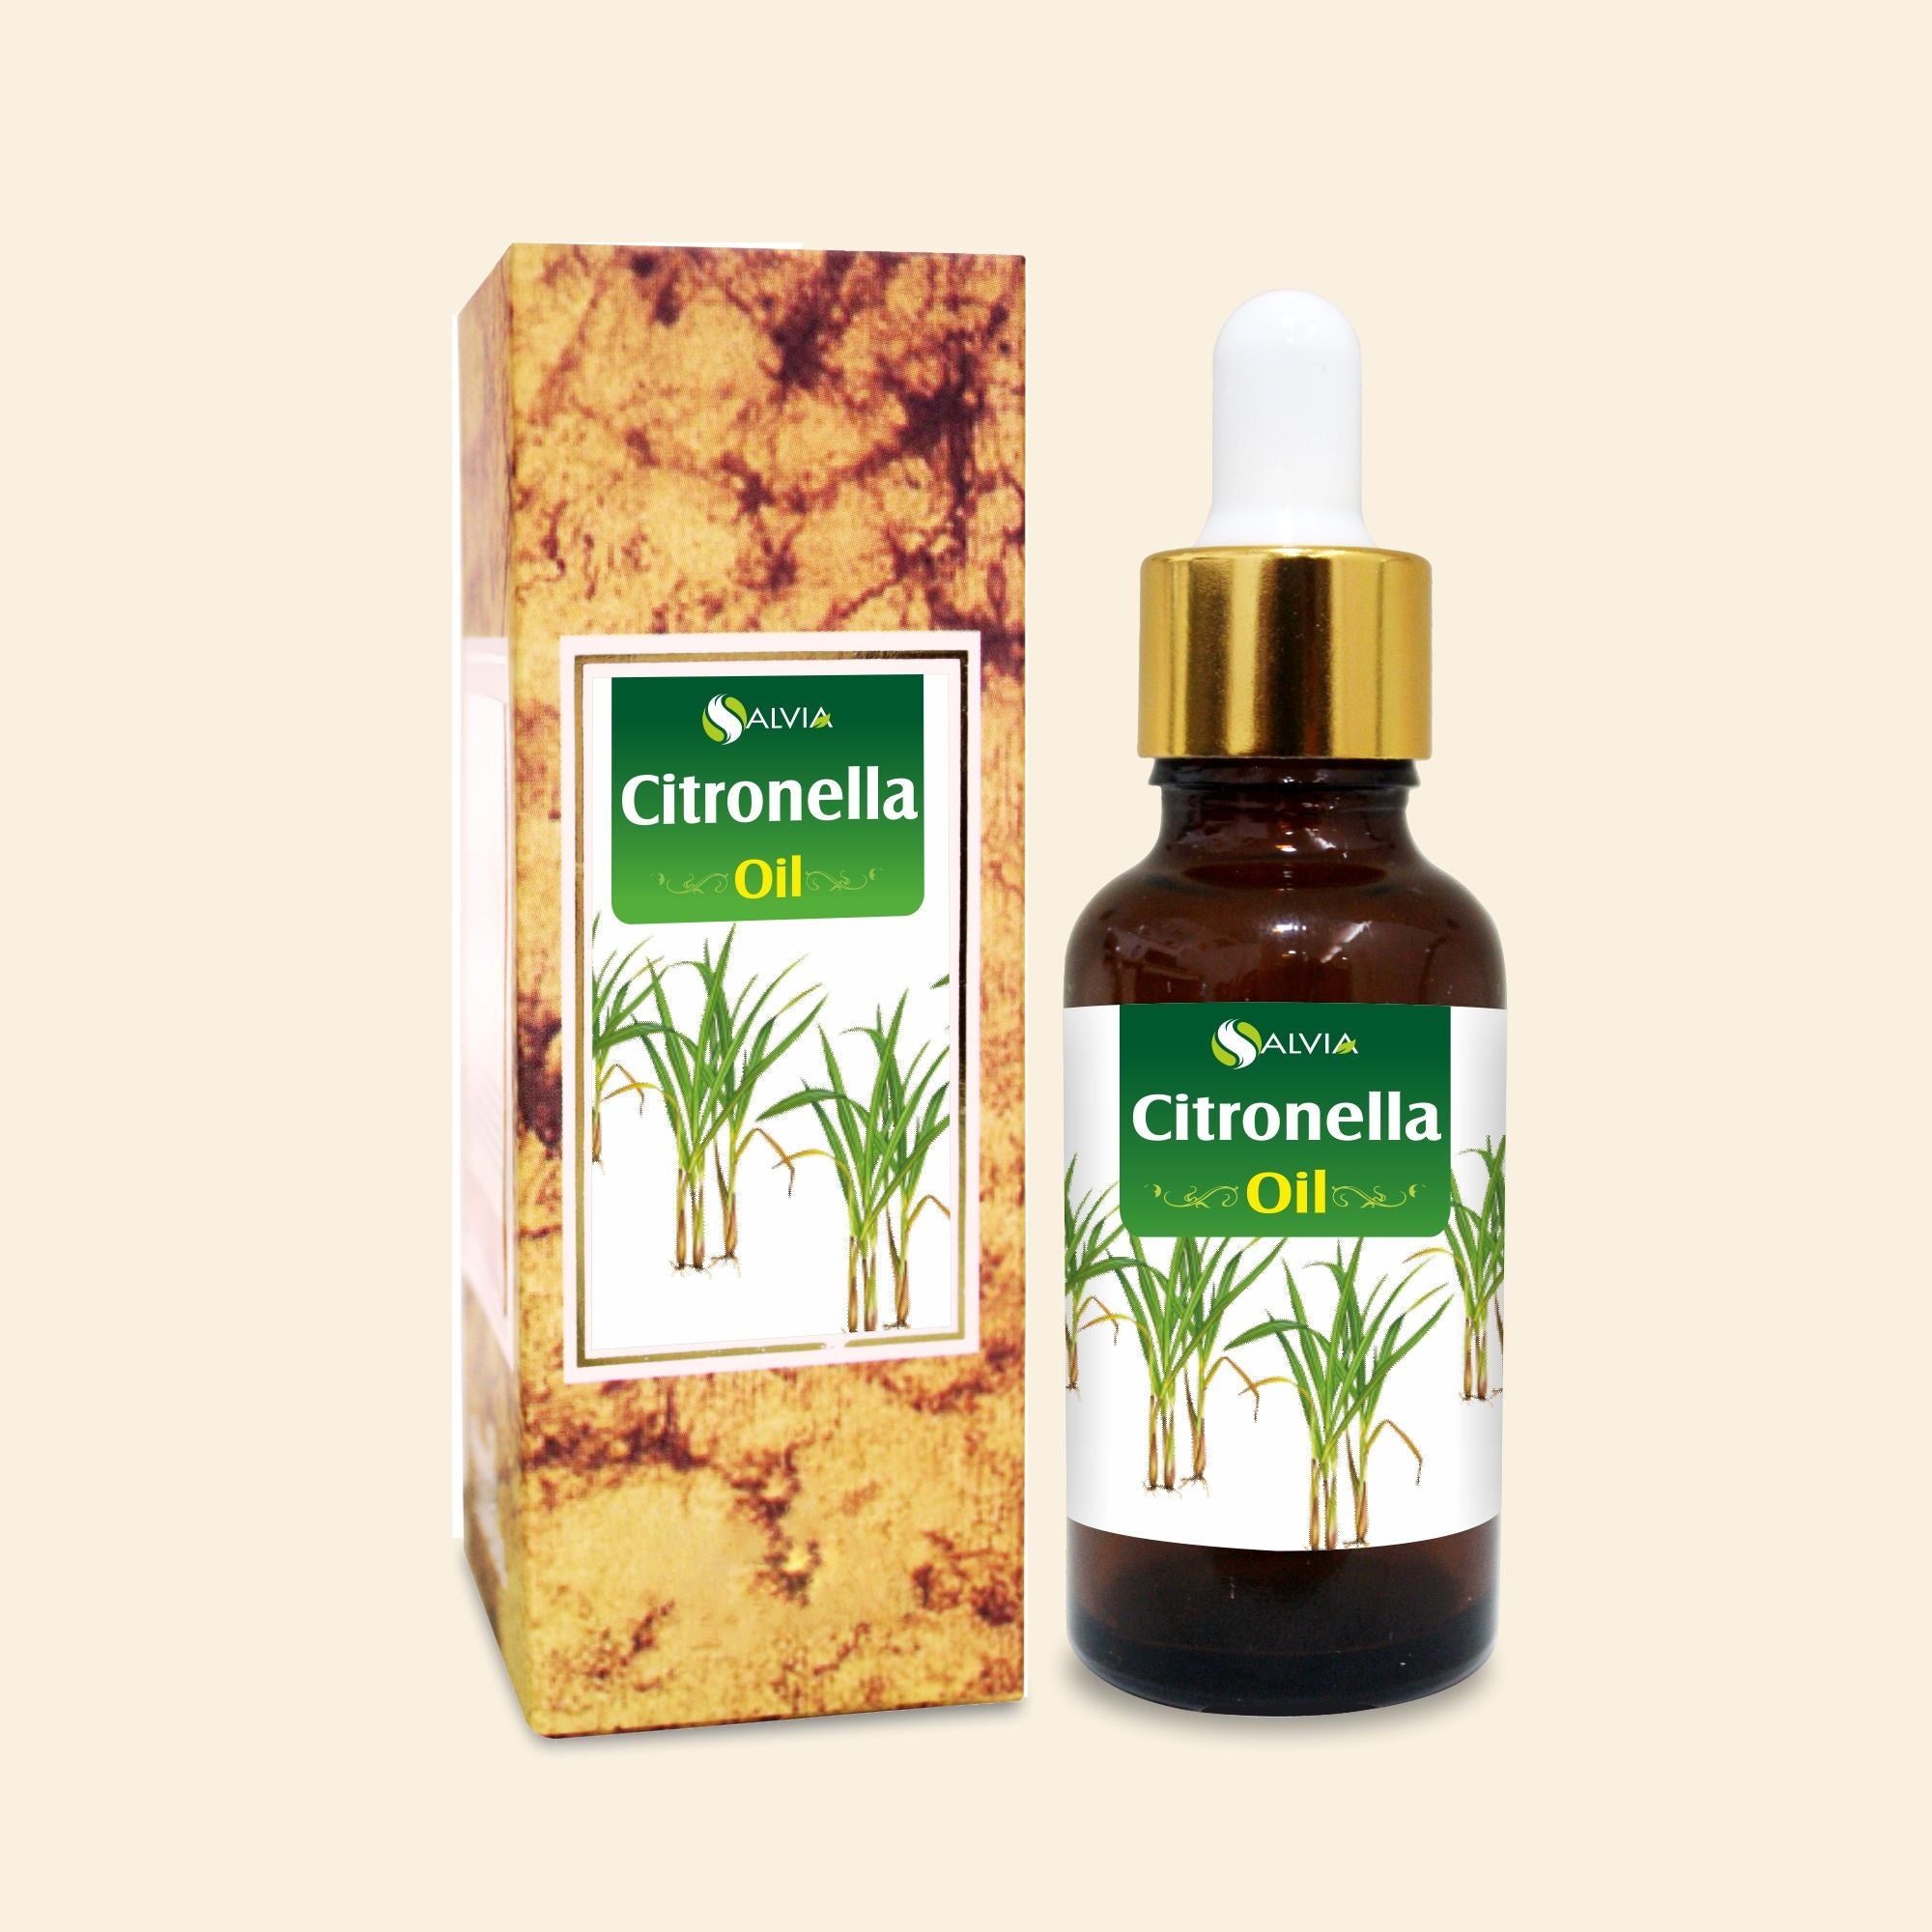 Salvia Natural Essential Oils Citronella Oil (Cymbopogon) 100% Natural Pure Essential Oil For Insect & Mosquito Repellent, Heals Wounds, Controls Muscle Spasms